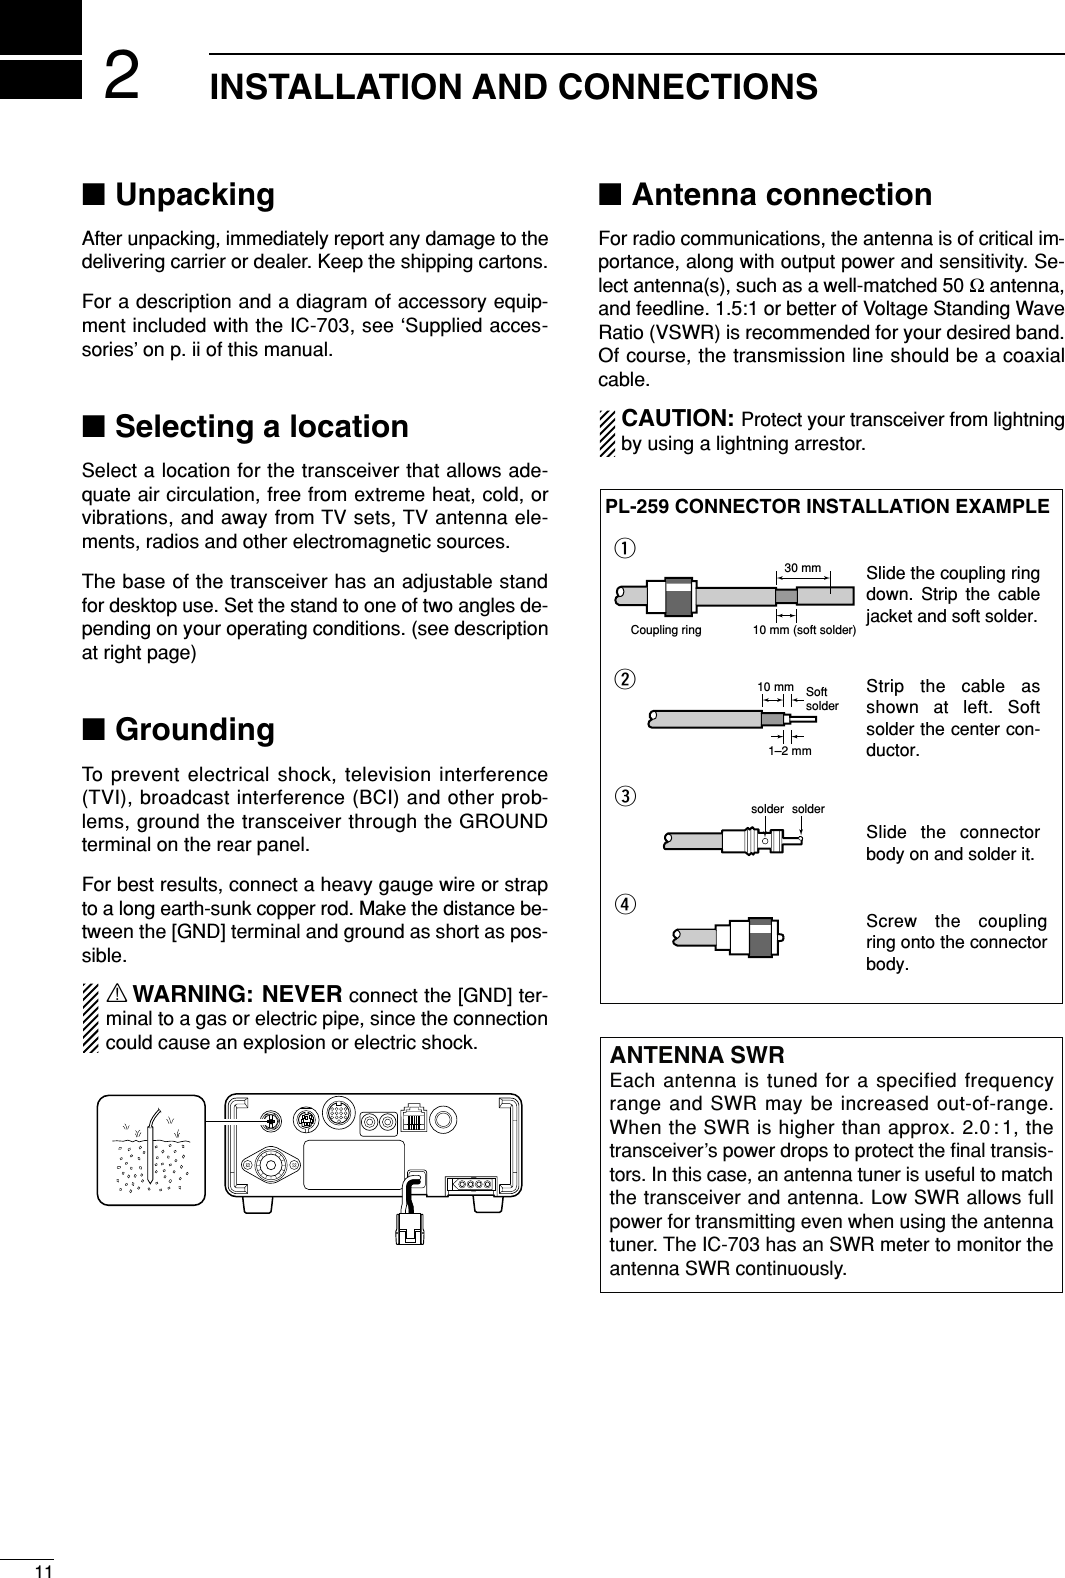 211INSTALLATION AND CONNECTIONS■UnpackingAfter unpacking, immediately report any damage to thedelivering carrier or dealer. Keep the shipping cartons.For a description and a diagram of accessory equip-ment included with the IC-703, see ‘Supplied acces-sories’ on p. ii of this manual.■Selecting a locationSelect a location for the transceiver that allows ade-quate air circulation, free from extreme heat, cold, orvibrations, and away from TV sets, TV antenna ele-ments, radios and other electromagnetic sources.The base of the transceiver has an adjustable standfor desktop use. Set the stand to one of two angles de-pending on your operating conditions. (see descriptionat right page)■GroundingTo prevent electrical shock, television interference(TVI), broadcast interference (BCI) and other prob-lems, ground the transceiver through the GROUNDterminal on the rear panel.For best results, connect a heavy gauge wire or strapto a long earth-sunk copper rod. Make the distance be-tween the [GND] terminal and ground as short as pos-sible.RWARNING: NEVER connect the [GND] ter-minal to a gas or electric pipe, since the connectioncould cause an explosion or electric shock.■Antenna connectionFor radio communications, the antenna is of critical im-portance, along with output power and sensitivity. Se-lect antenna(s), such as a well-matched 50 Ωantenna,and feedline. 1.5:1 or better of Voltage Standing WaveRatio (VSWR) is recommended for your desired band.Of course, the transmission line should be a coaxialcable.CAUTION: Protect your transceiver from lightningby using a lightning arrestor.ANTENNA SWREach antenna is tuned for a specified frequencyrange and SWR may be increased out-of-range.When the SWR is higher than approx. 2.0 : 1, thetransceiver’s power drops to protect the ﬁnal transis-tors. In this case, an antenna tuner is useful to matchthe transceiver and antenna. Low SWR allows fullpower for transmitting even when using the antennatuner. The IC-703 has an SWR meter to monitor theantenna SWR continuously.30 mm10 mm (soft solder)10 mm1–2 mmsolder solderSoftsolderCoupling ringPL-259 CONNECTOR INSTALLATION EXAMPLEqerwSlide the coupling ring down. Strip the cable jacket and soft solder.Slide the connector body on and solder it.Screw the coupling ring onto the connector body.Strip the cable as shown at left. Soft solder the center con-ductor.